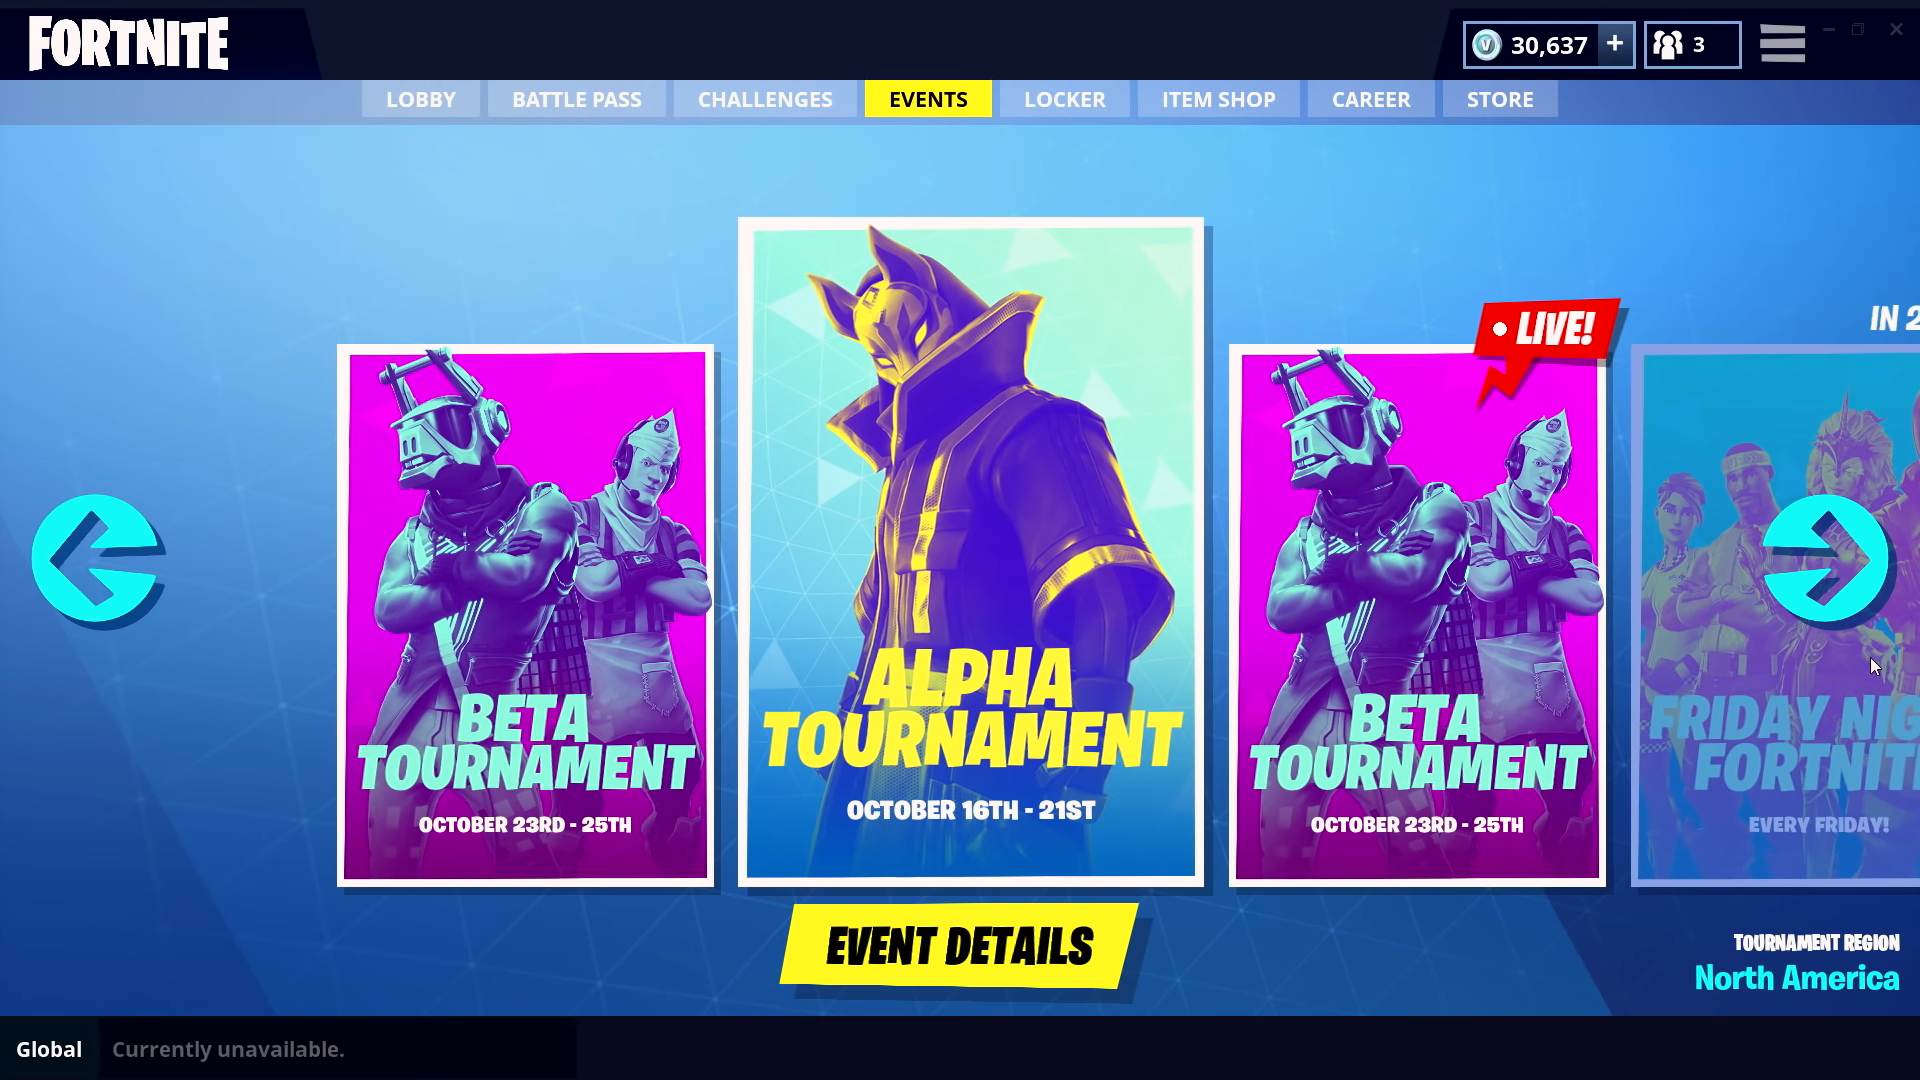 find out when fortnite s alpha tournament opens in your region - how to get into fortnite tournaments